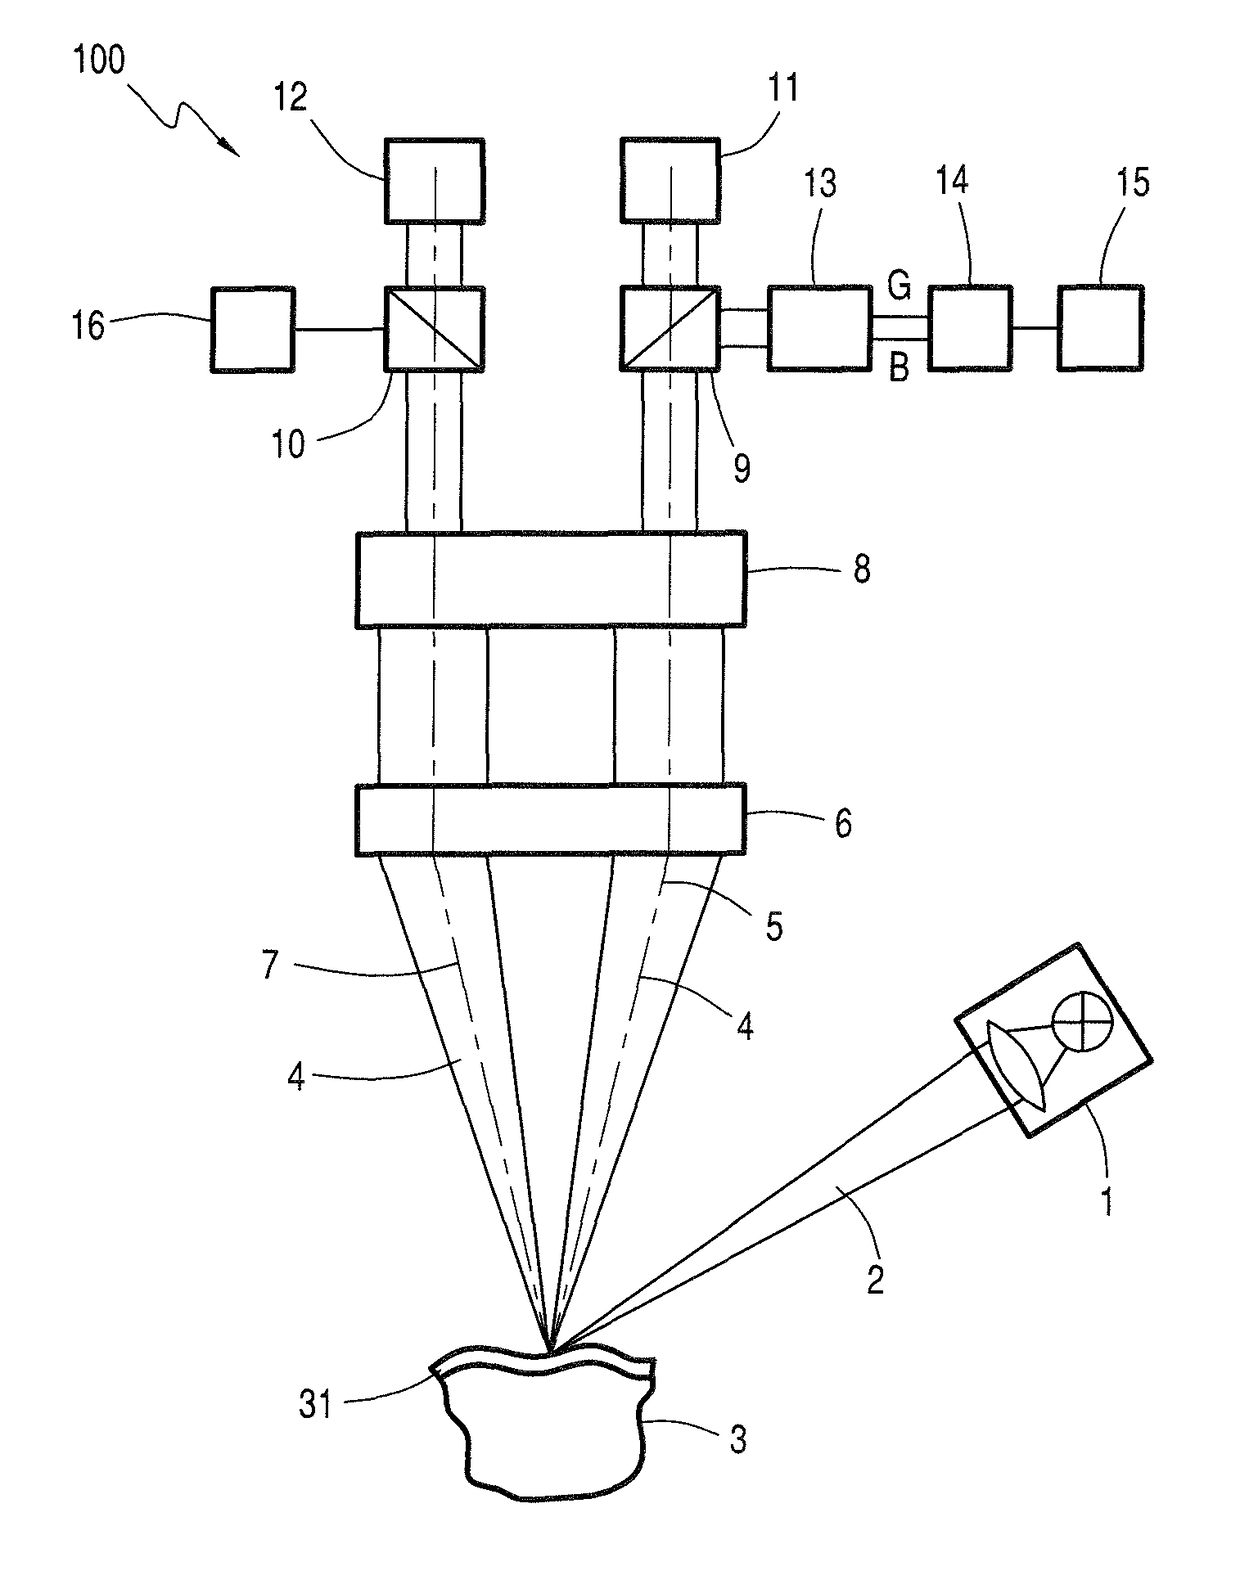 Apparatus for finding a functional tissue area in a tissue region